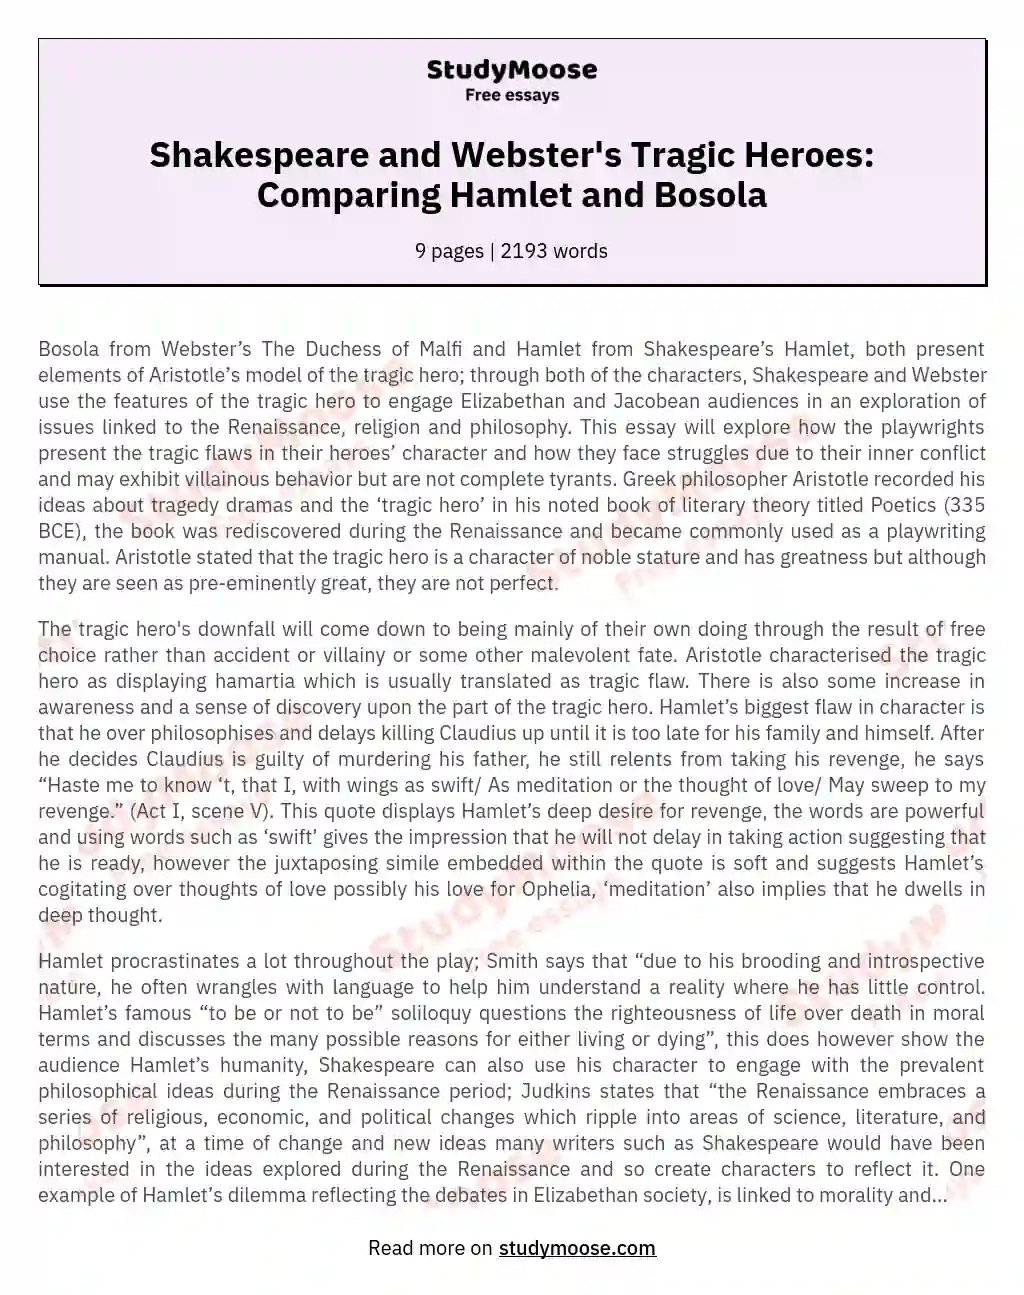 Compare and Contrast the Ways in Which Shakespeare and Webster Present Hamlet and Bosola as Tragic Heroes.